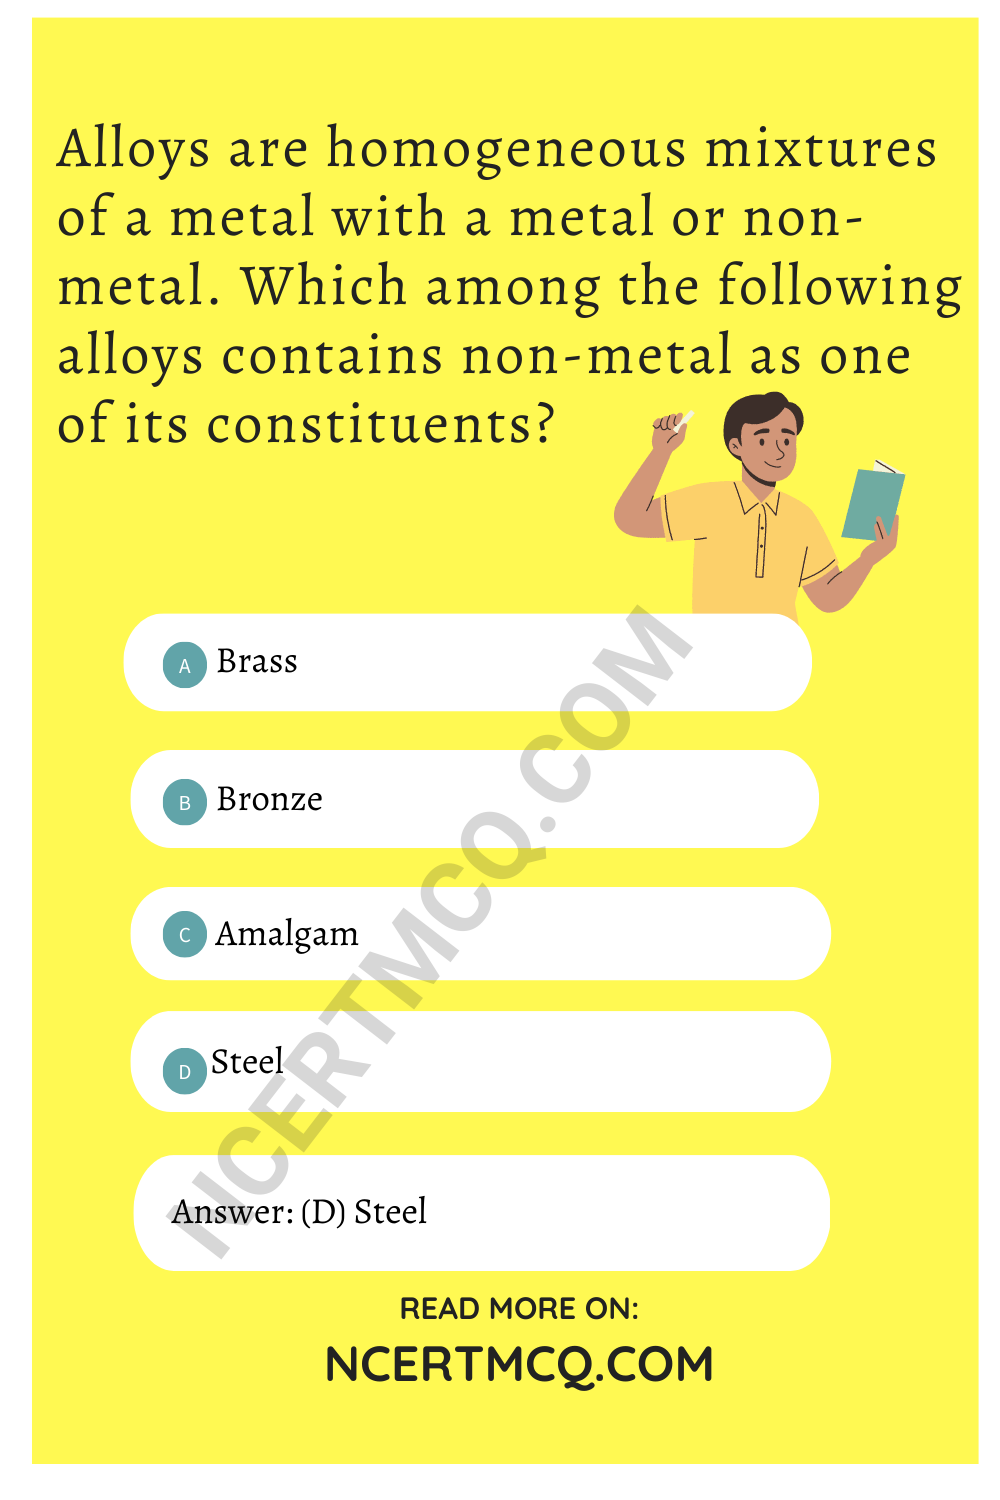 Alloys are homogeneous mixtures of a metal with a metal or non-metal. Which among the following alloys contains non-metal as one of its constituents?